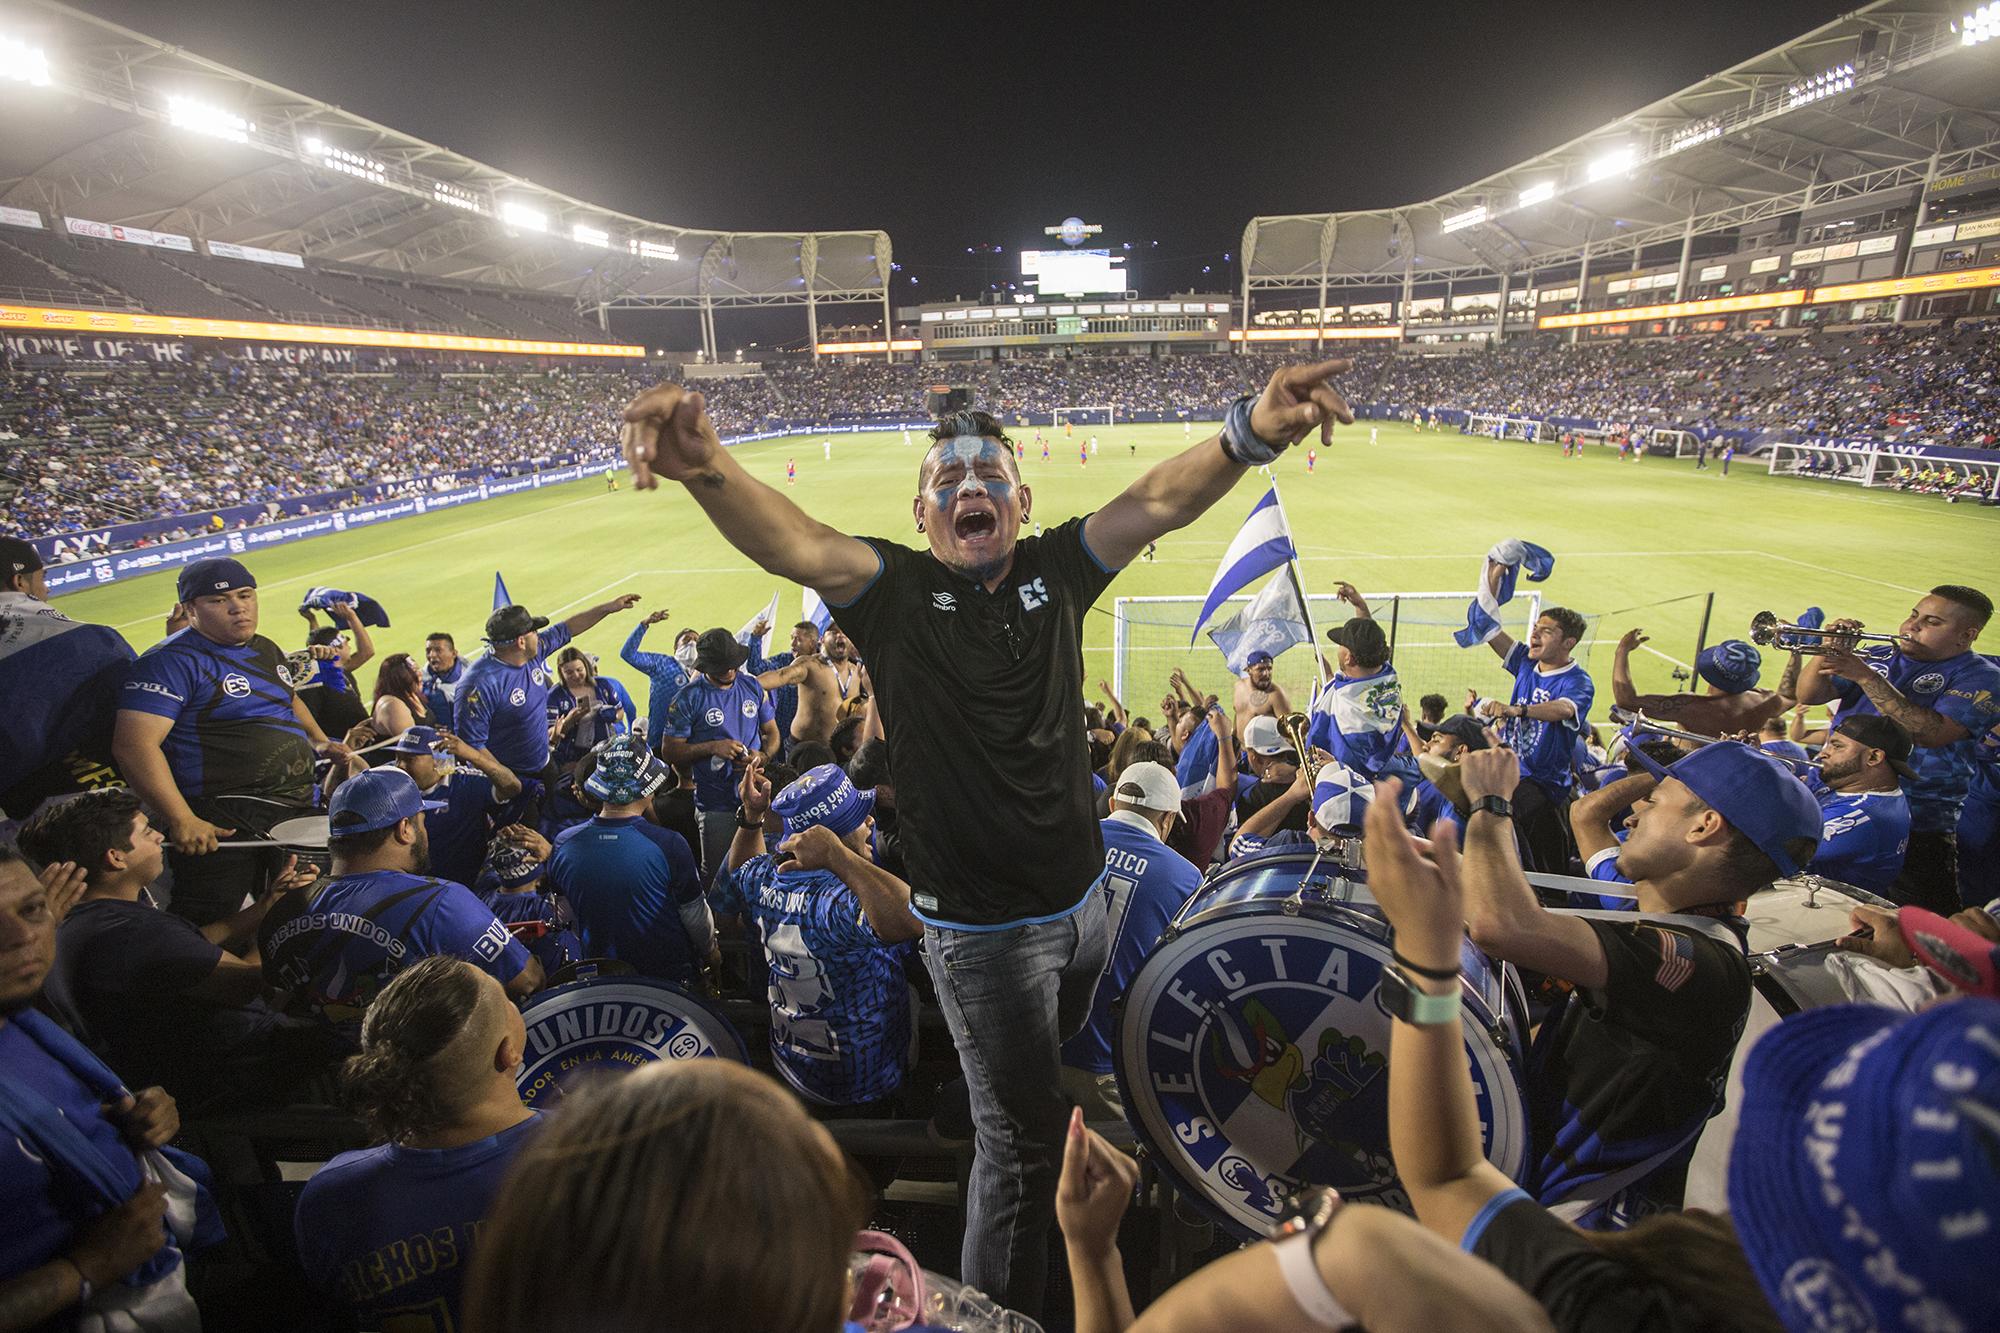 La Barra 503, a fan group from Houston, and Bichos Unidos, from Dallas, travel thousands of miles around the United States by bus to scream from the stands during La Selecta